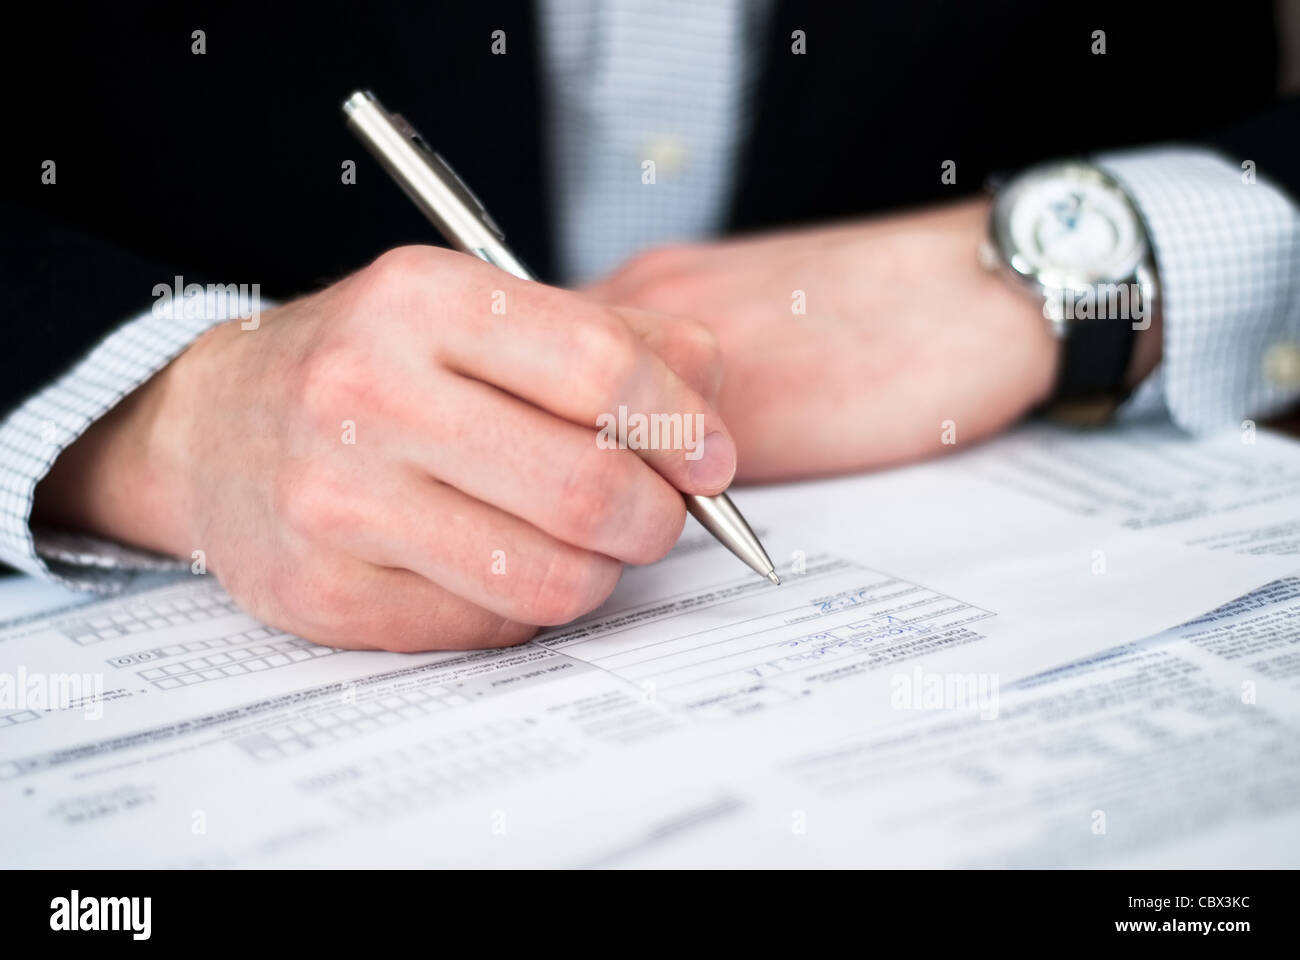 Filling out business documents on a desk Stock Photo